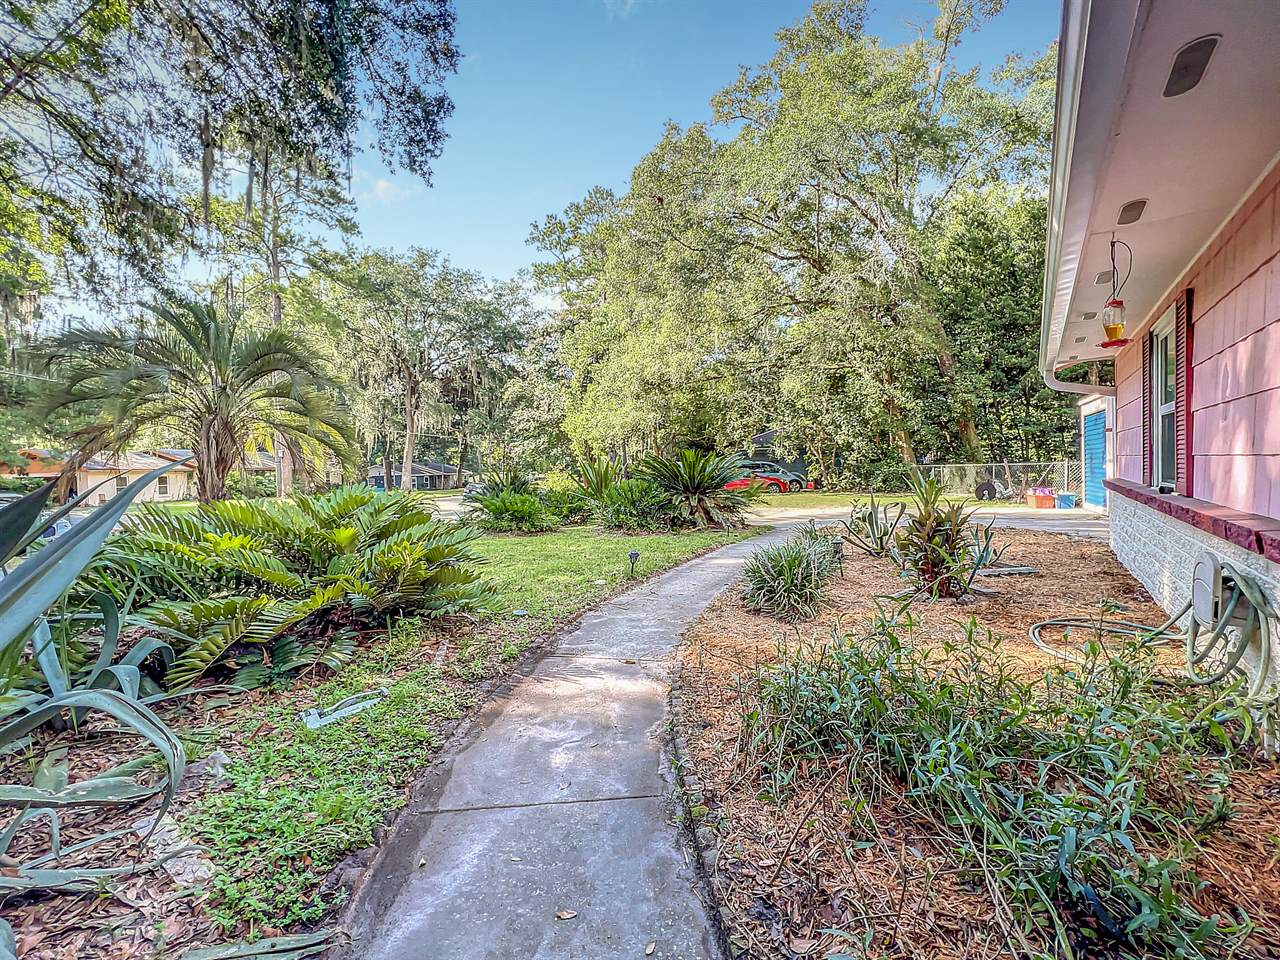 4730 NW 39th Terrace, Gainesville, FL 32606